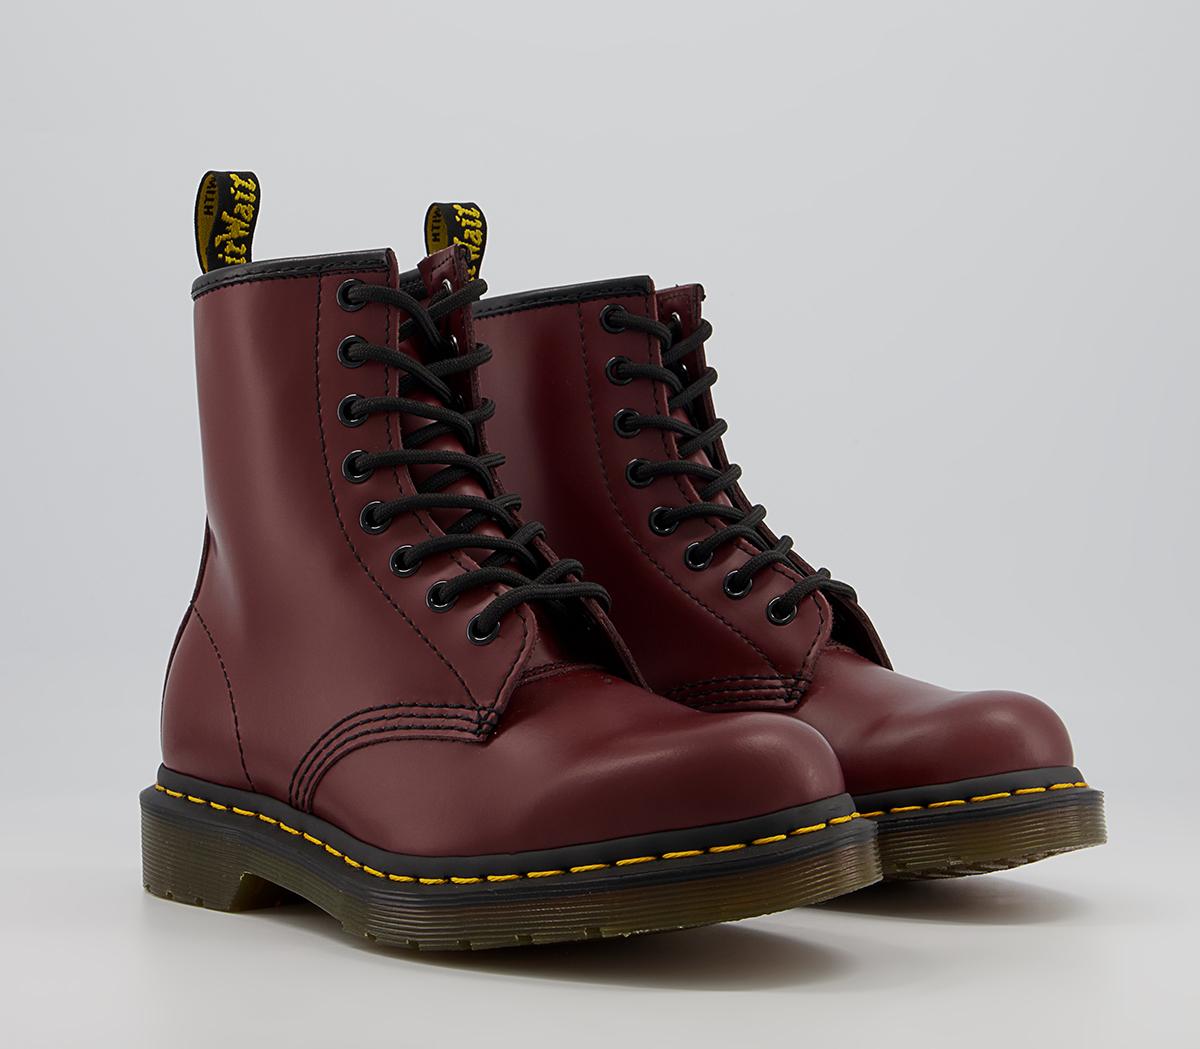 Dr. Martens Womens 8 Eyelet Lace Up Bt Cherry Red Boots, 3